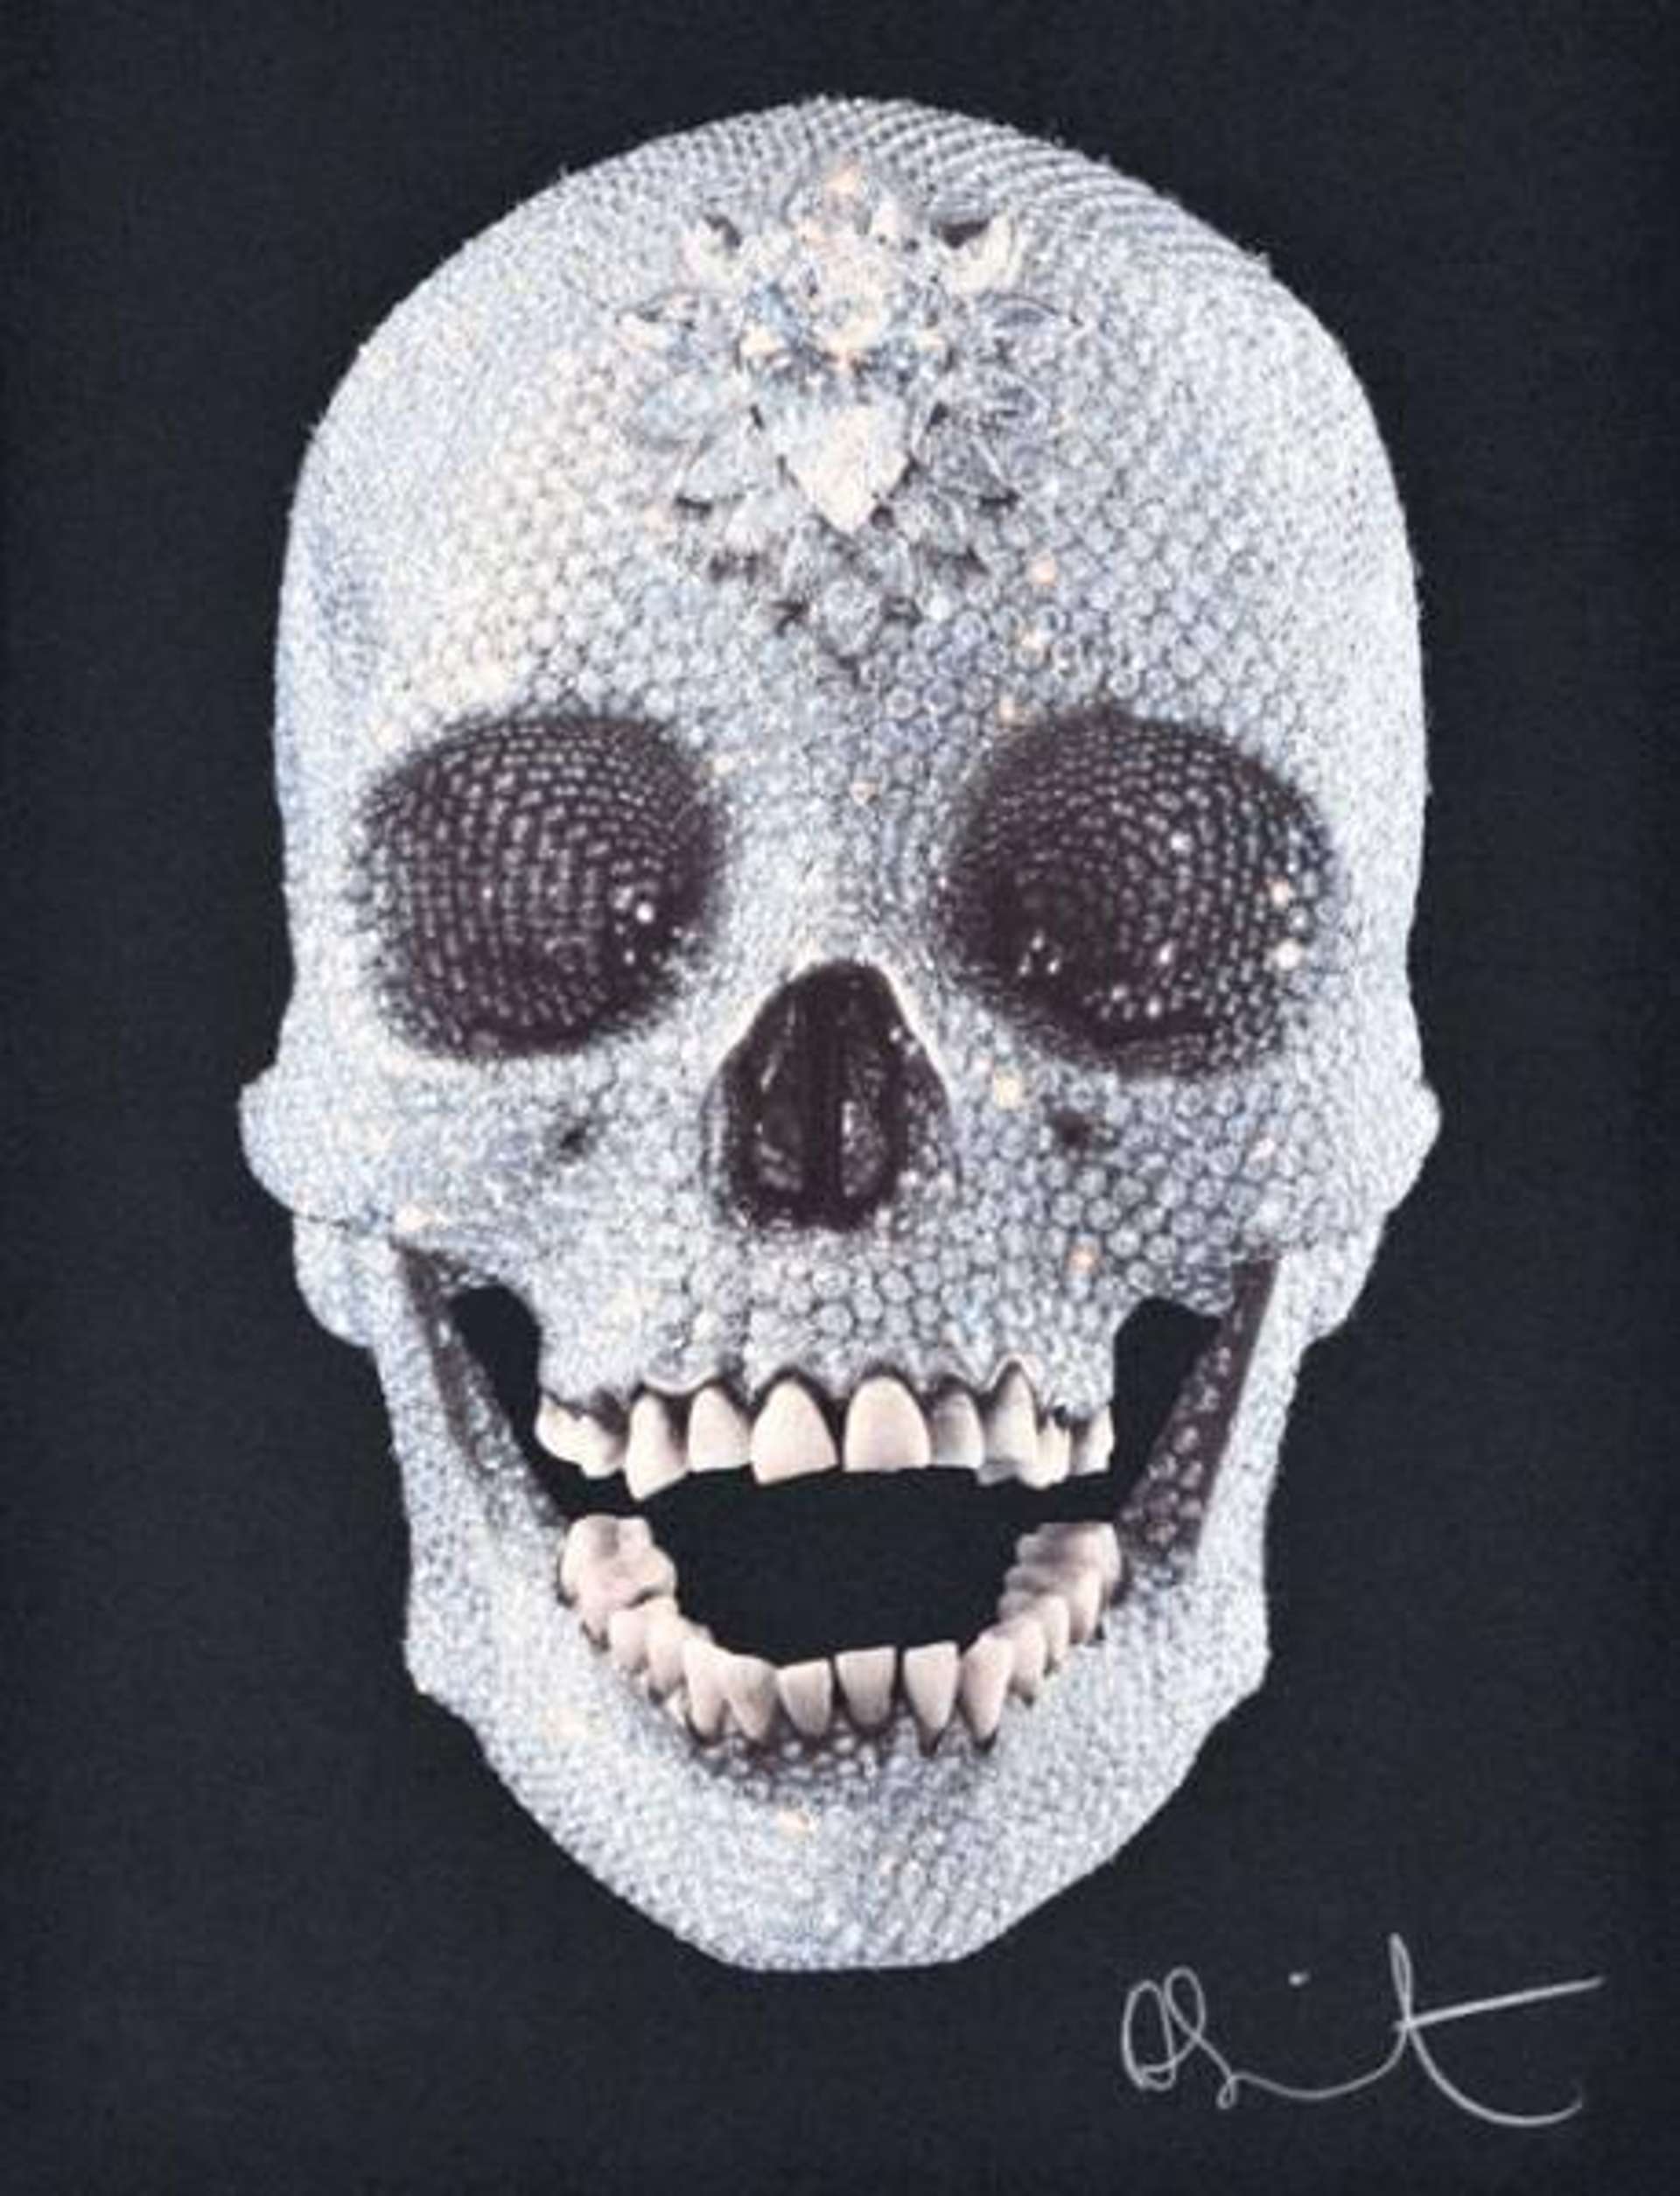 10 Facts About Hirst's 'For the Love of God', Article